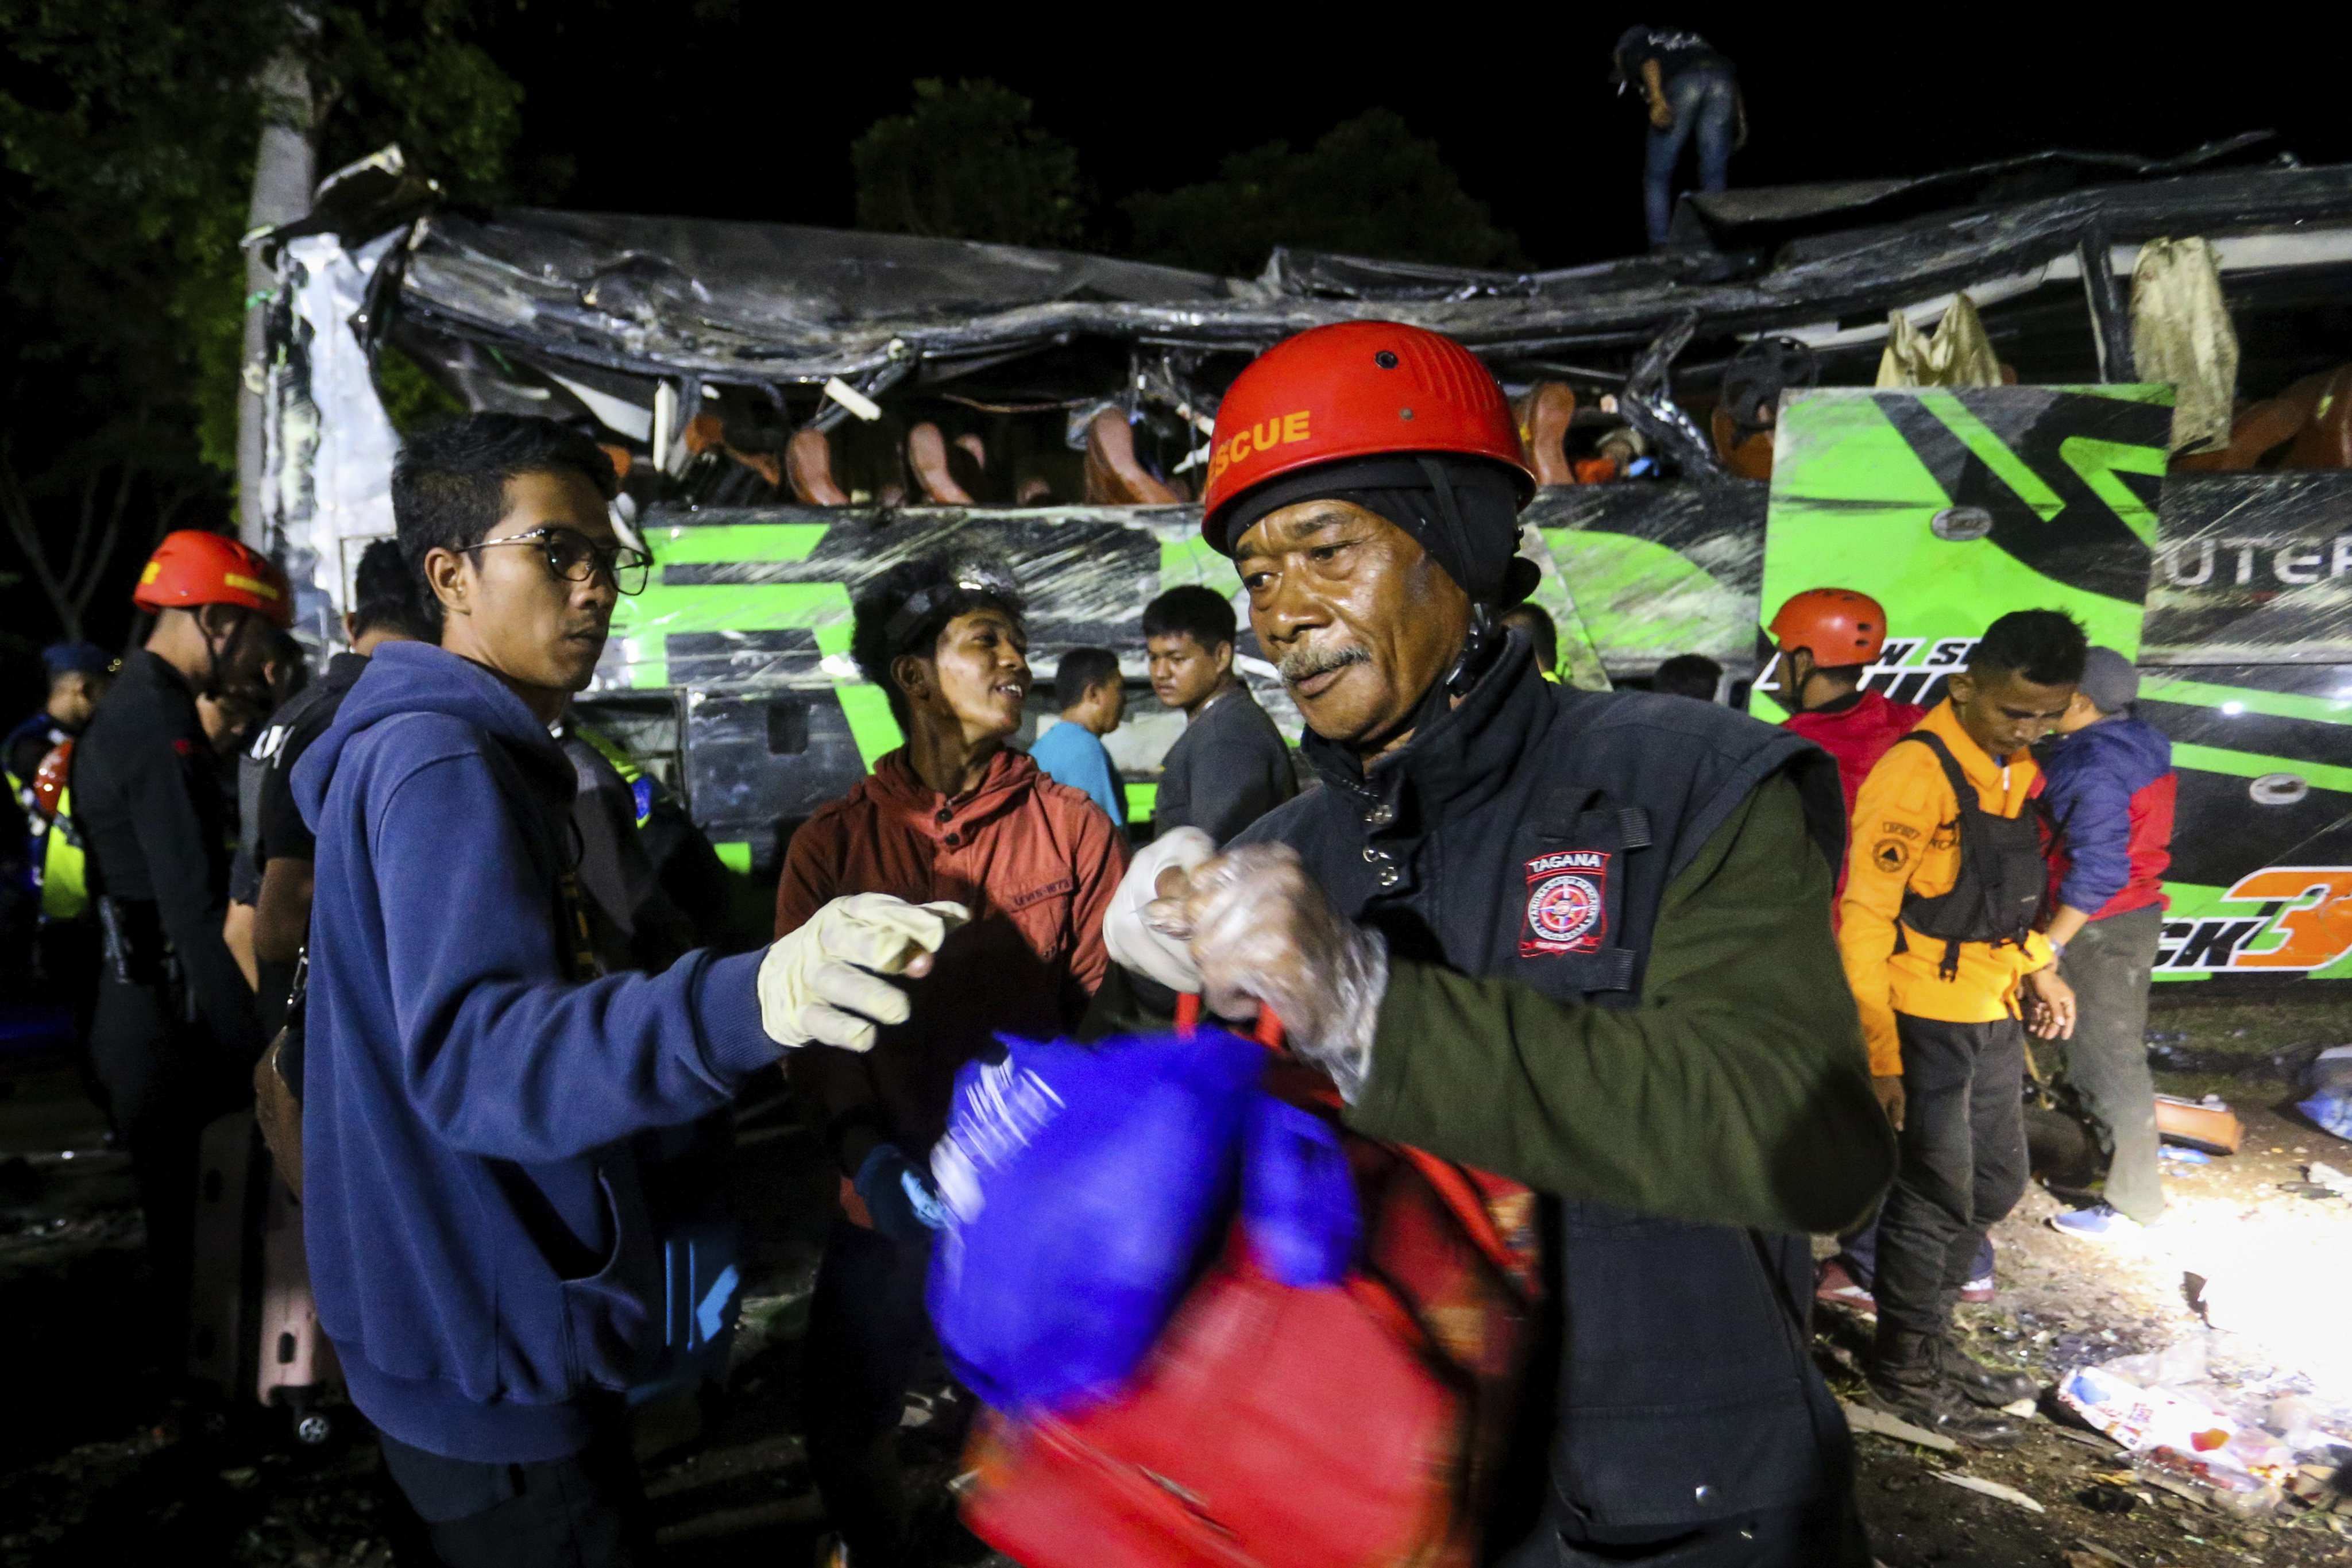 Rescuers collect the belongings of victims from the wreckage of a bus carrying students after it crashed late on Saturday in Subang, West Java, Indonesia. Photo: AP